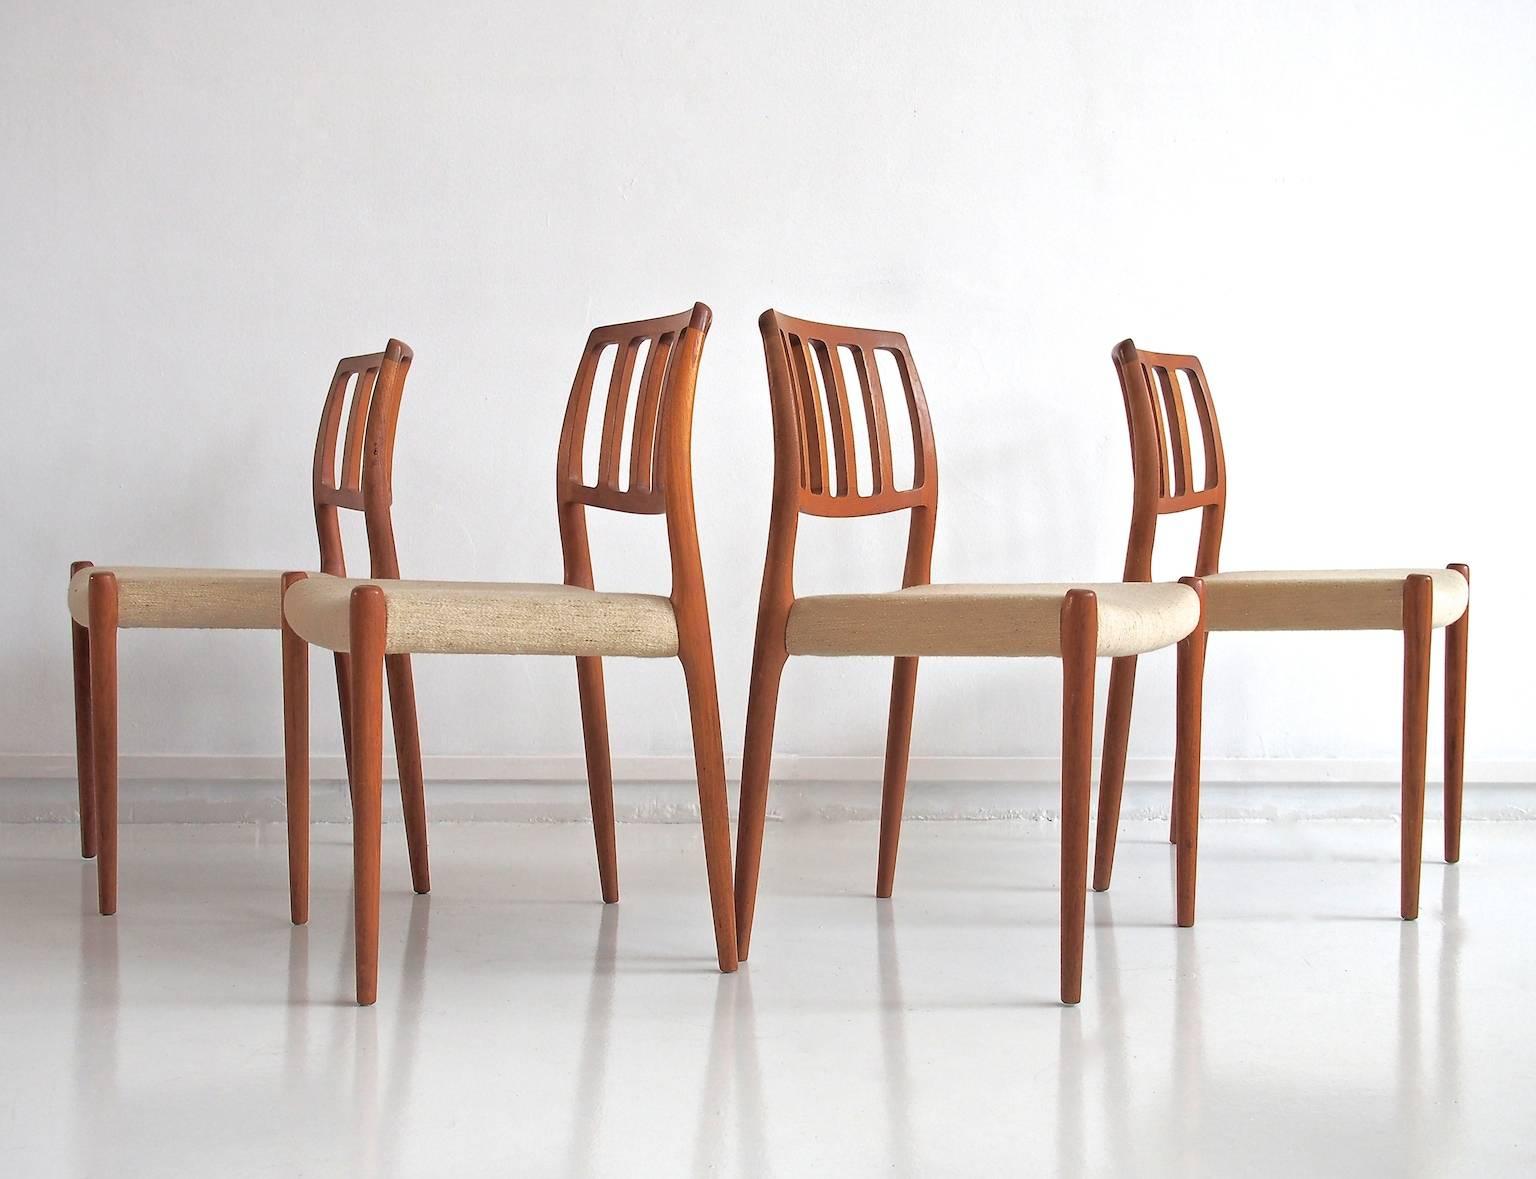 Four dining chairs, model 83, designed by Niels O. Møller in 1974. Organic design of solid wood. Seats with light beige mottled wool fabric. Manufacturer stamp underneath.